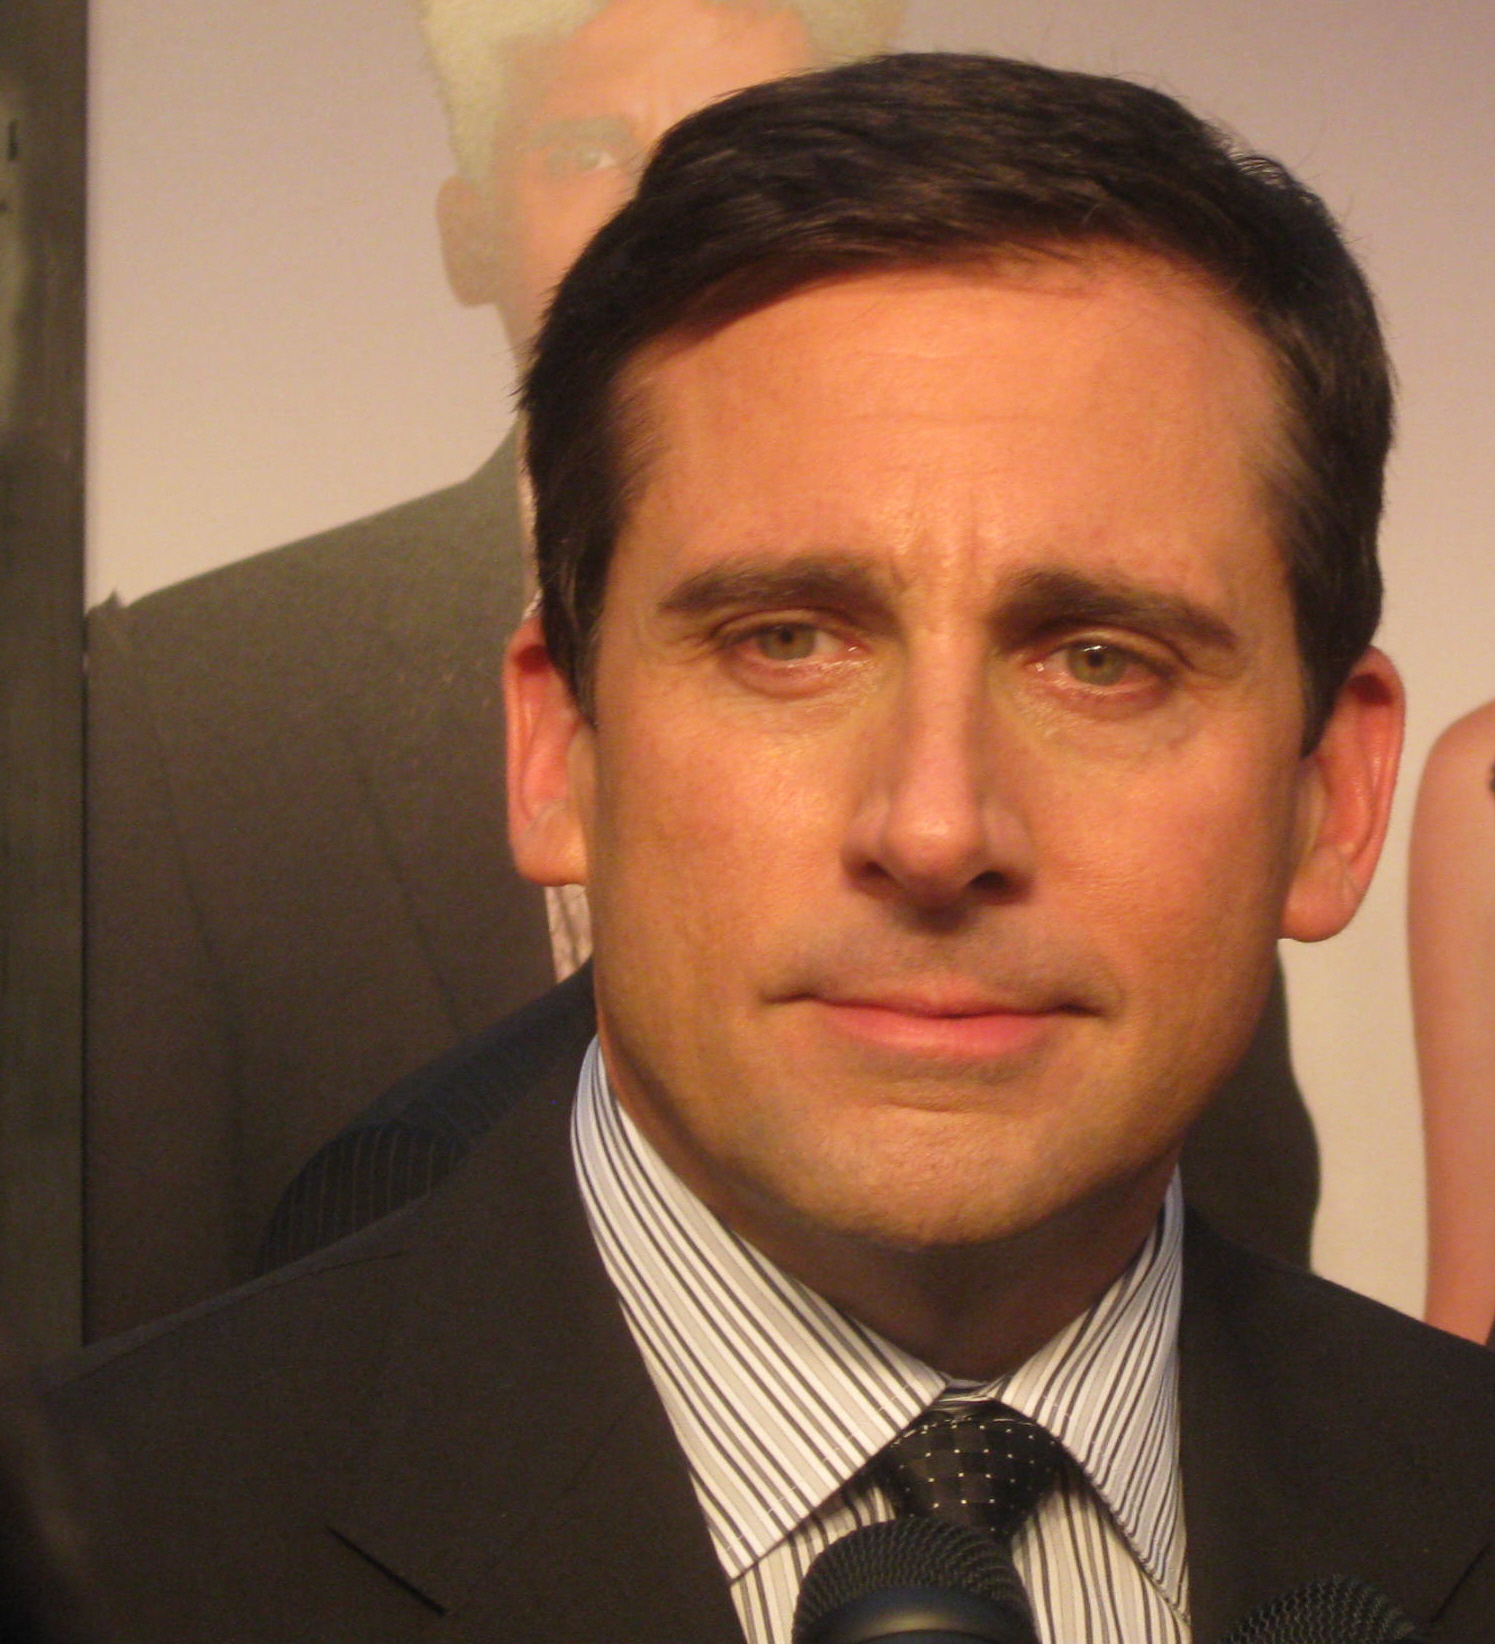 stevecarell02 - CARELL & FEY HAVE "DATE NIGHT" FROM HELL!